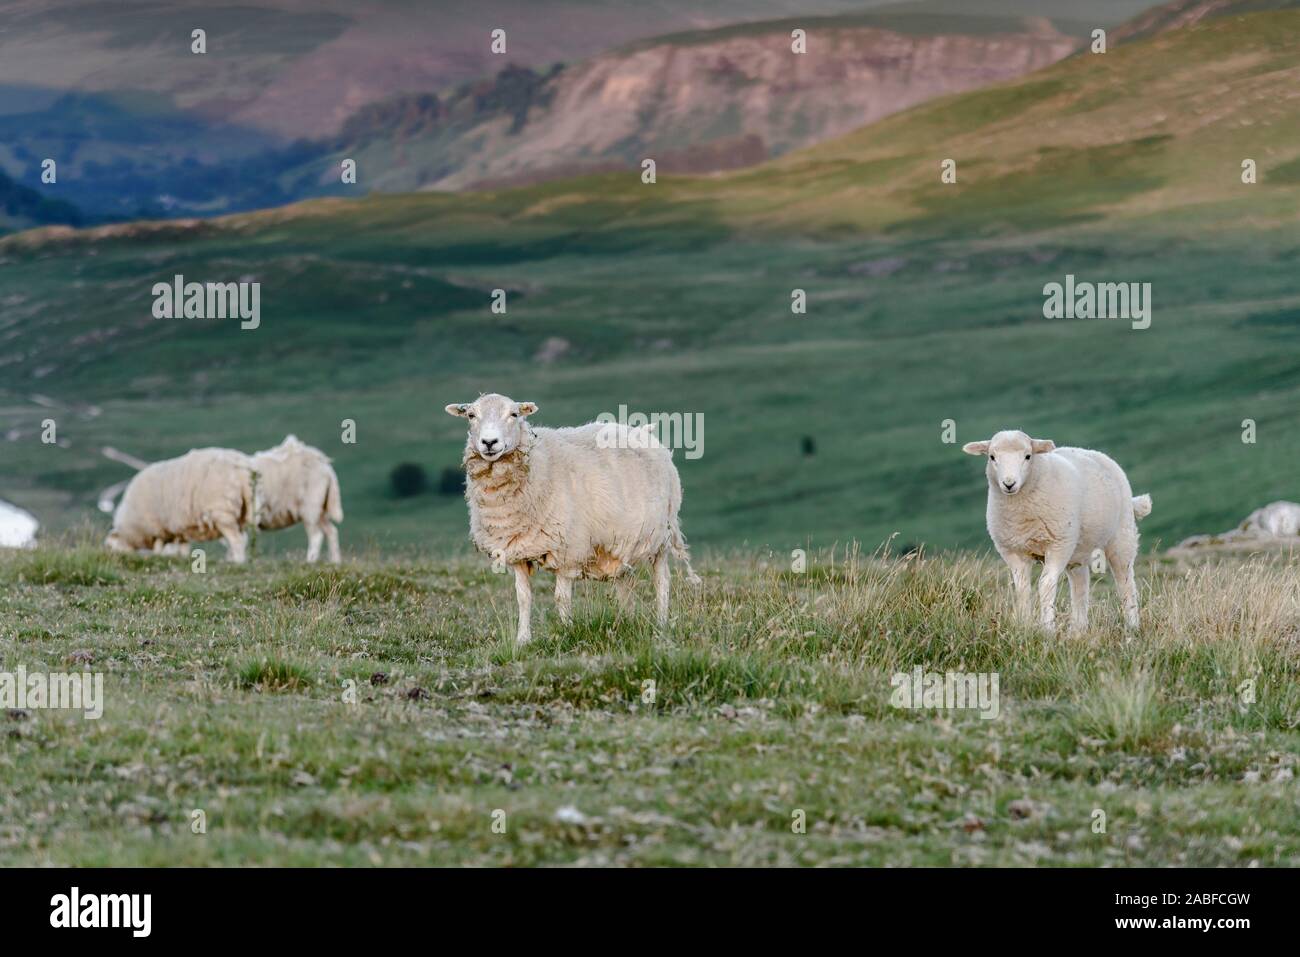 Sheep grazing in the natural landscape of mid Wales, UK. Stock Photo